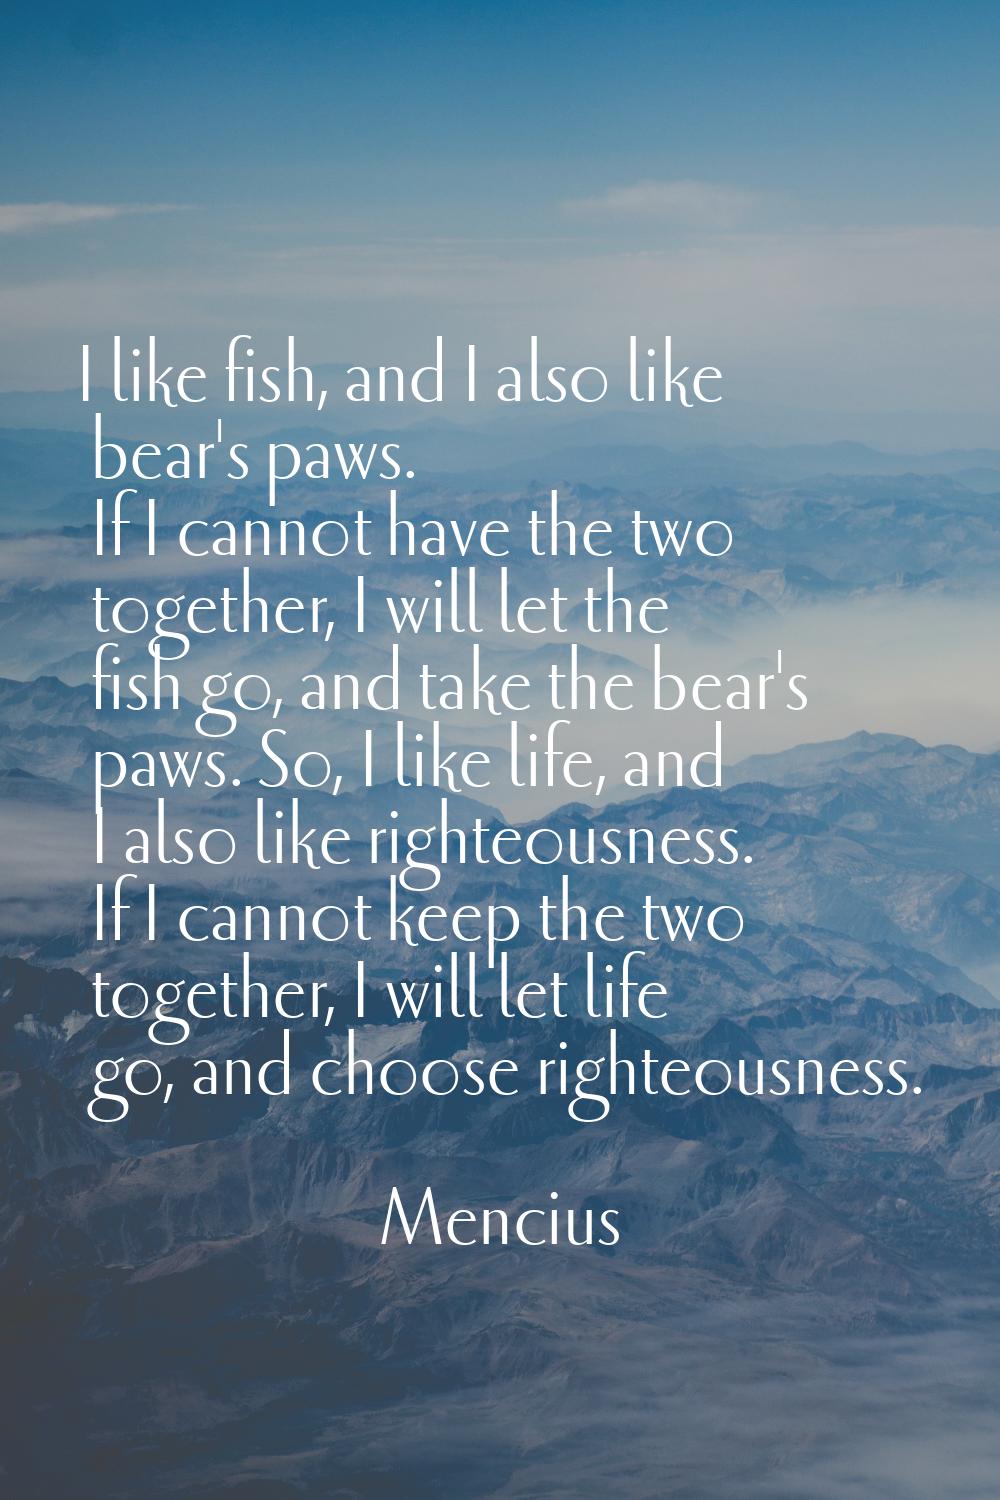 I like fish, and I also like bear's paws. If I cannot have the two together, I will let the fish go